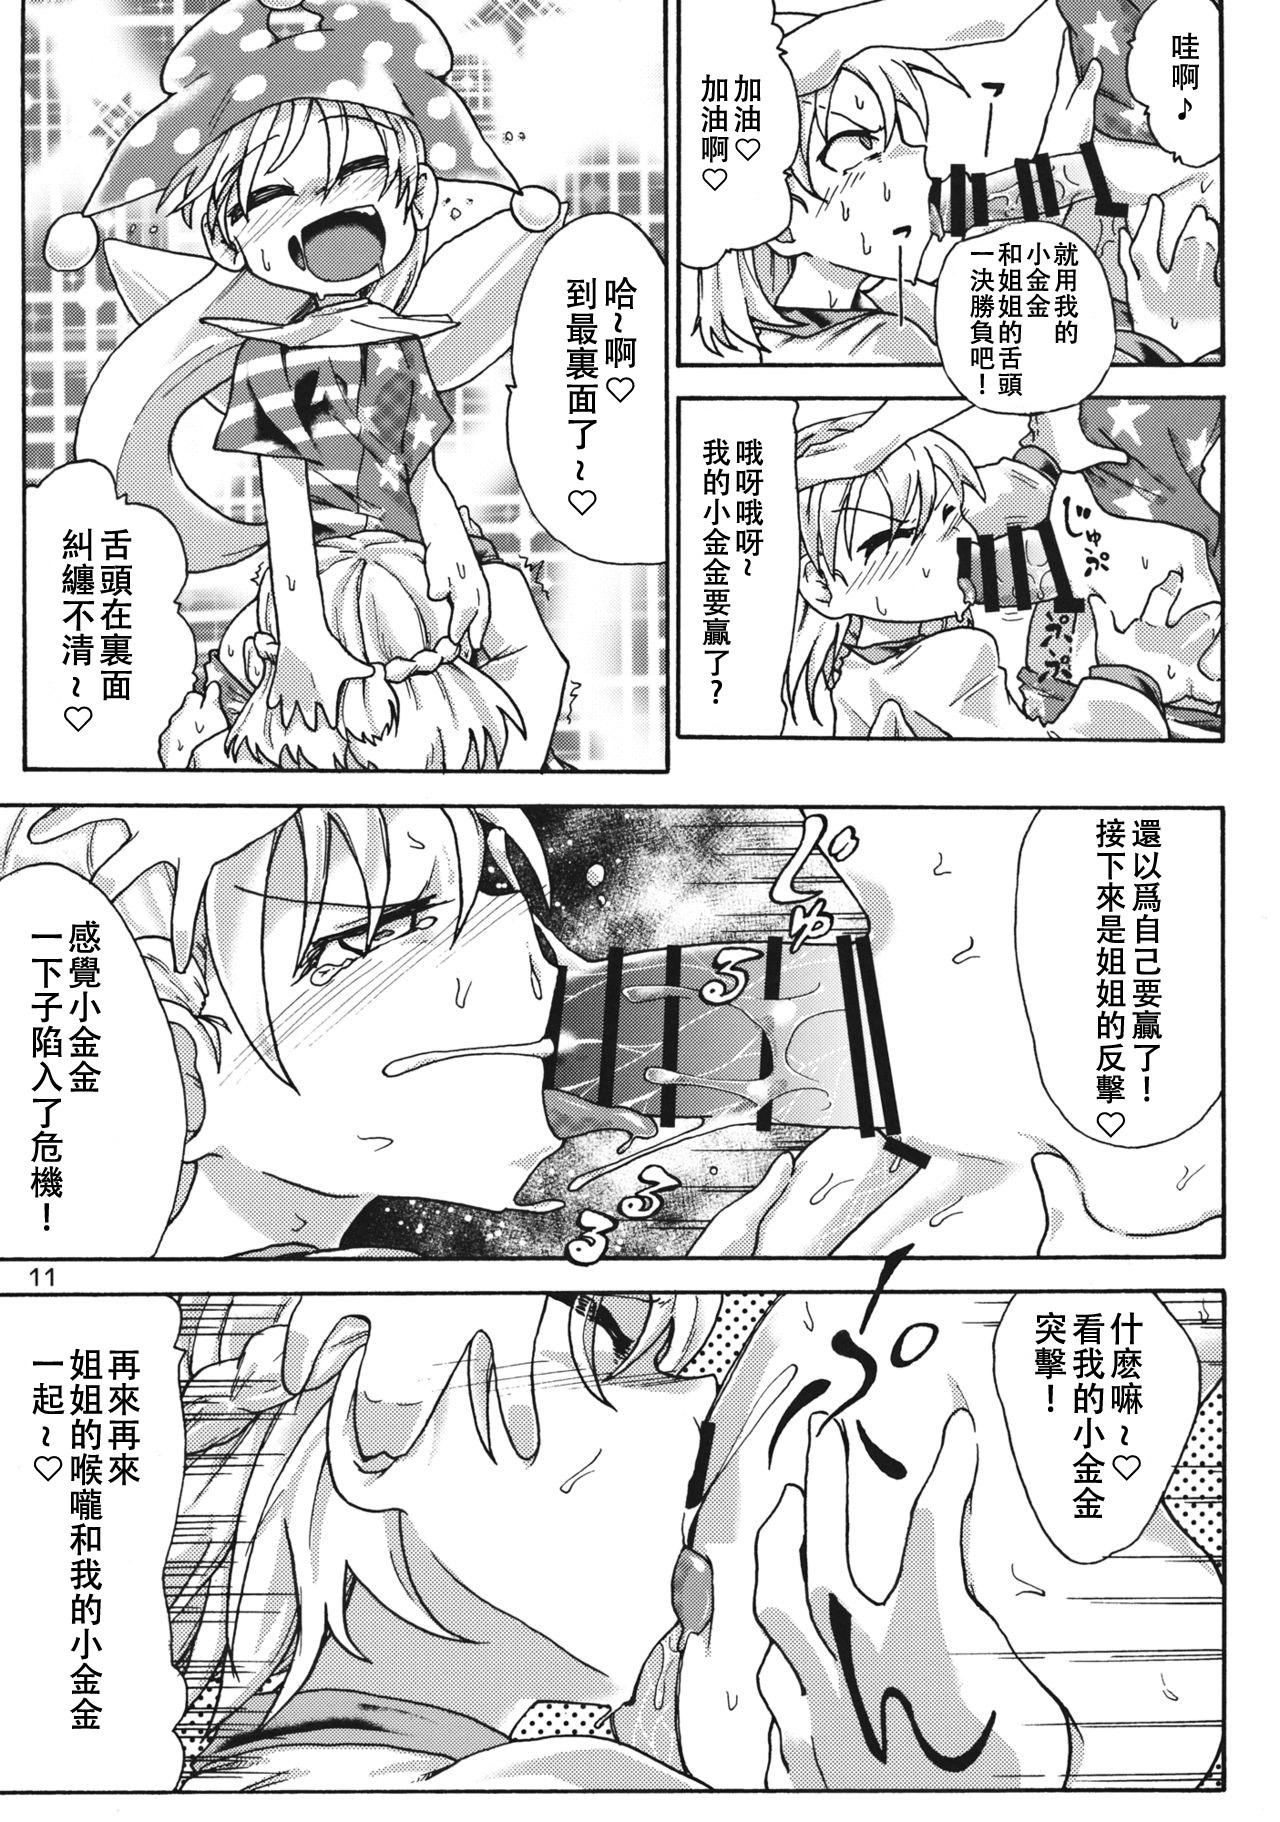 Lesbian Porn Creeping! - Touhou project Gay Spank - Page 10